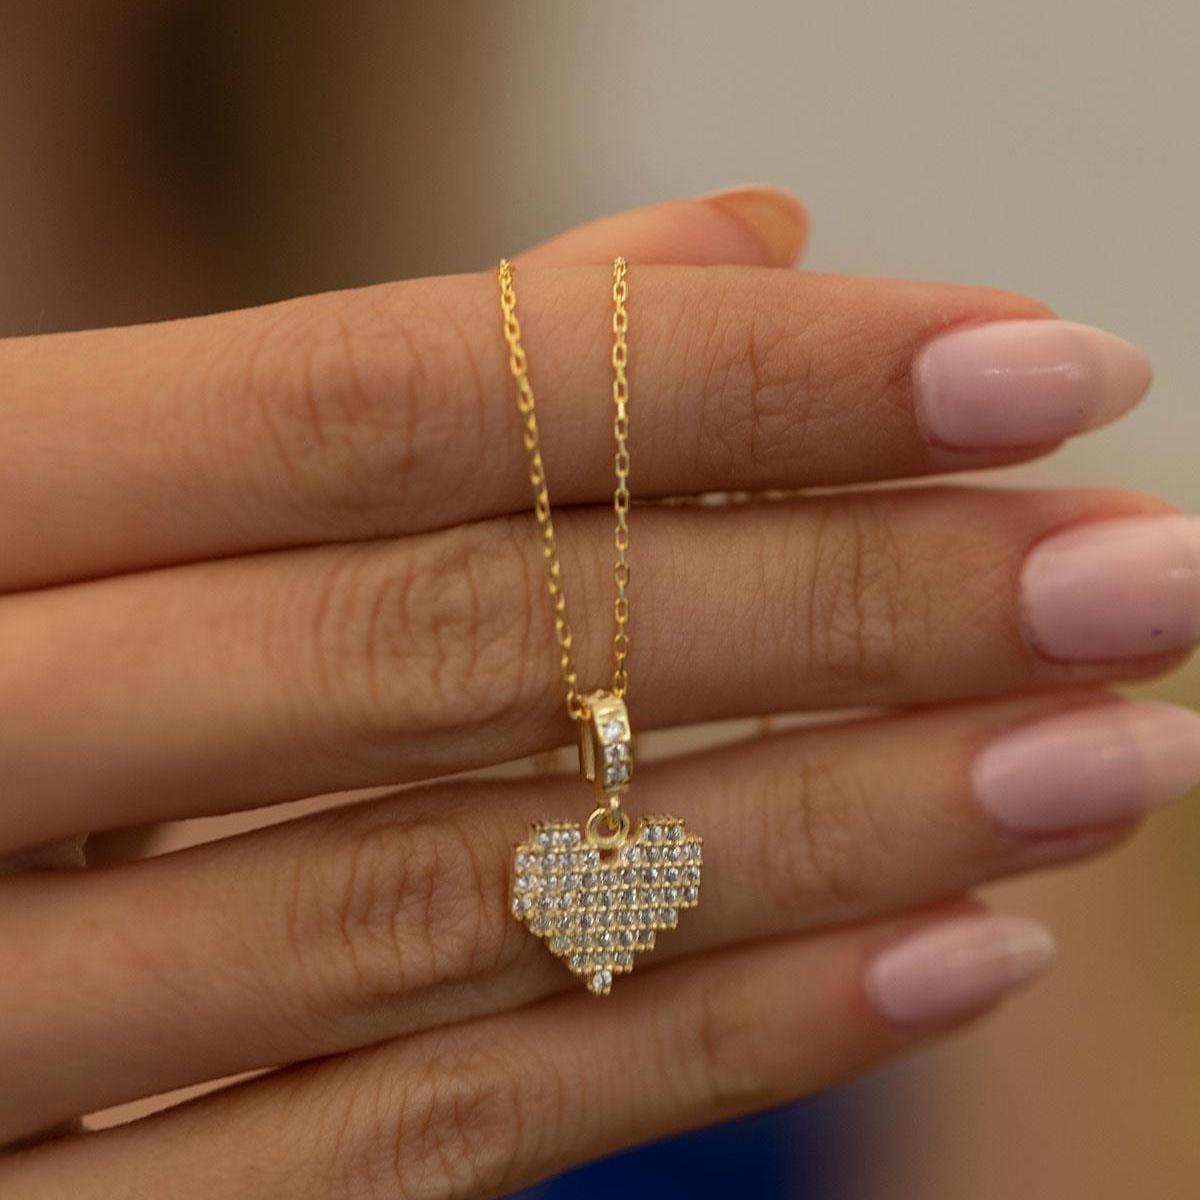 Heart Shaped Necklace • Heart Pendant Necklace • Gold Heart Necklace - Trending Silver Gifts